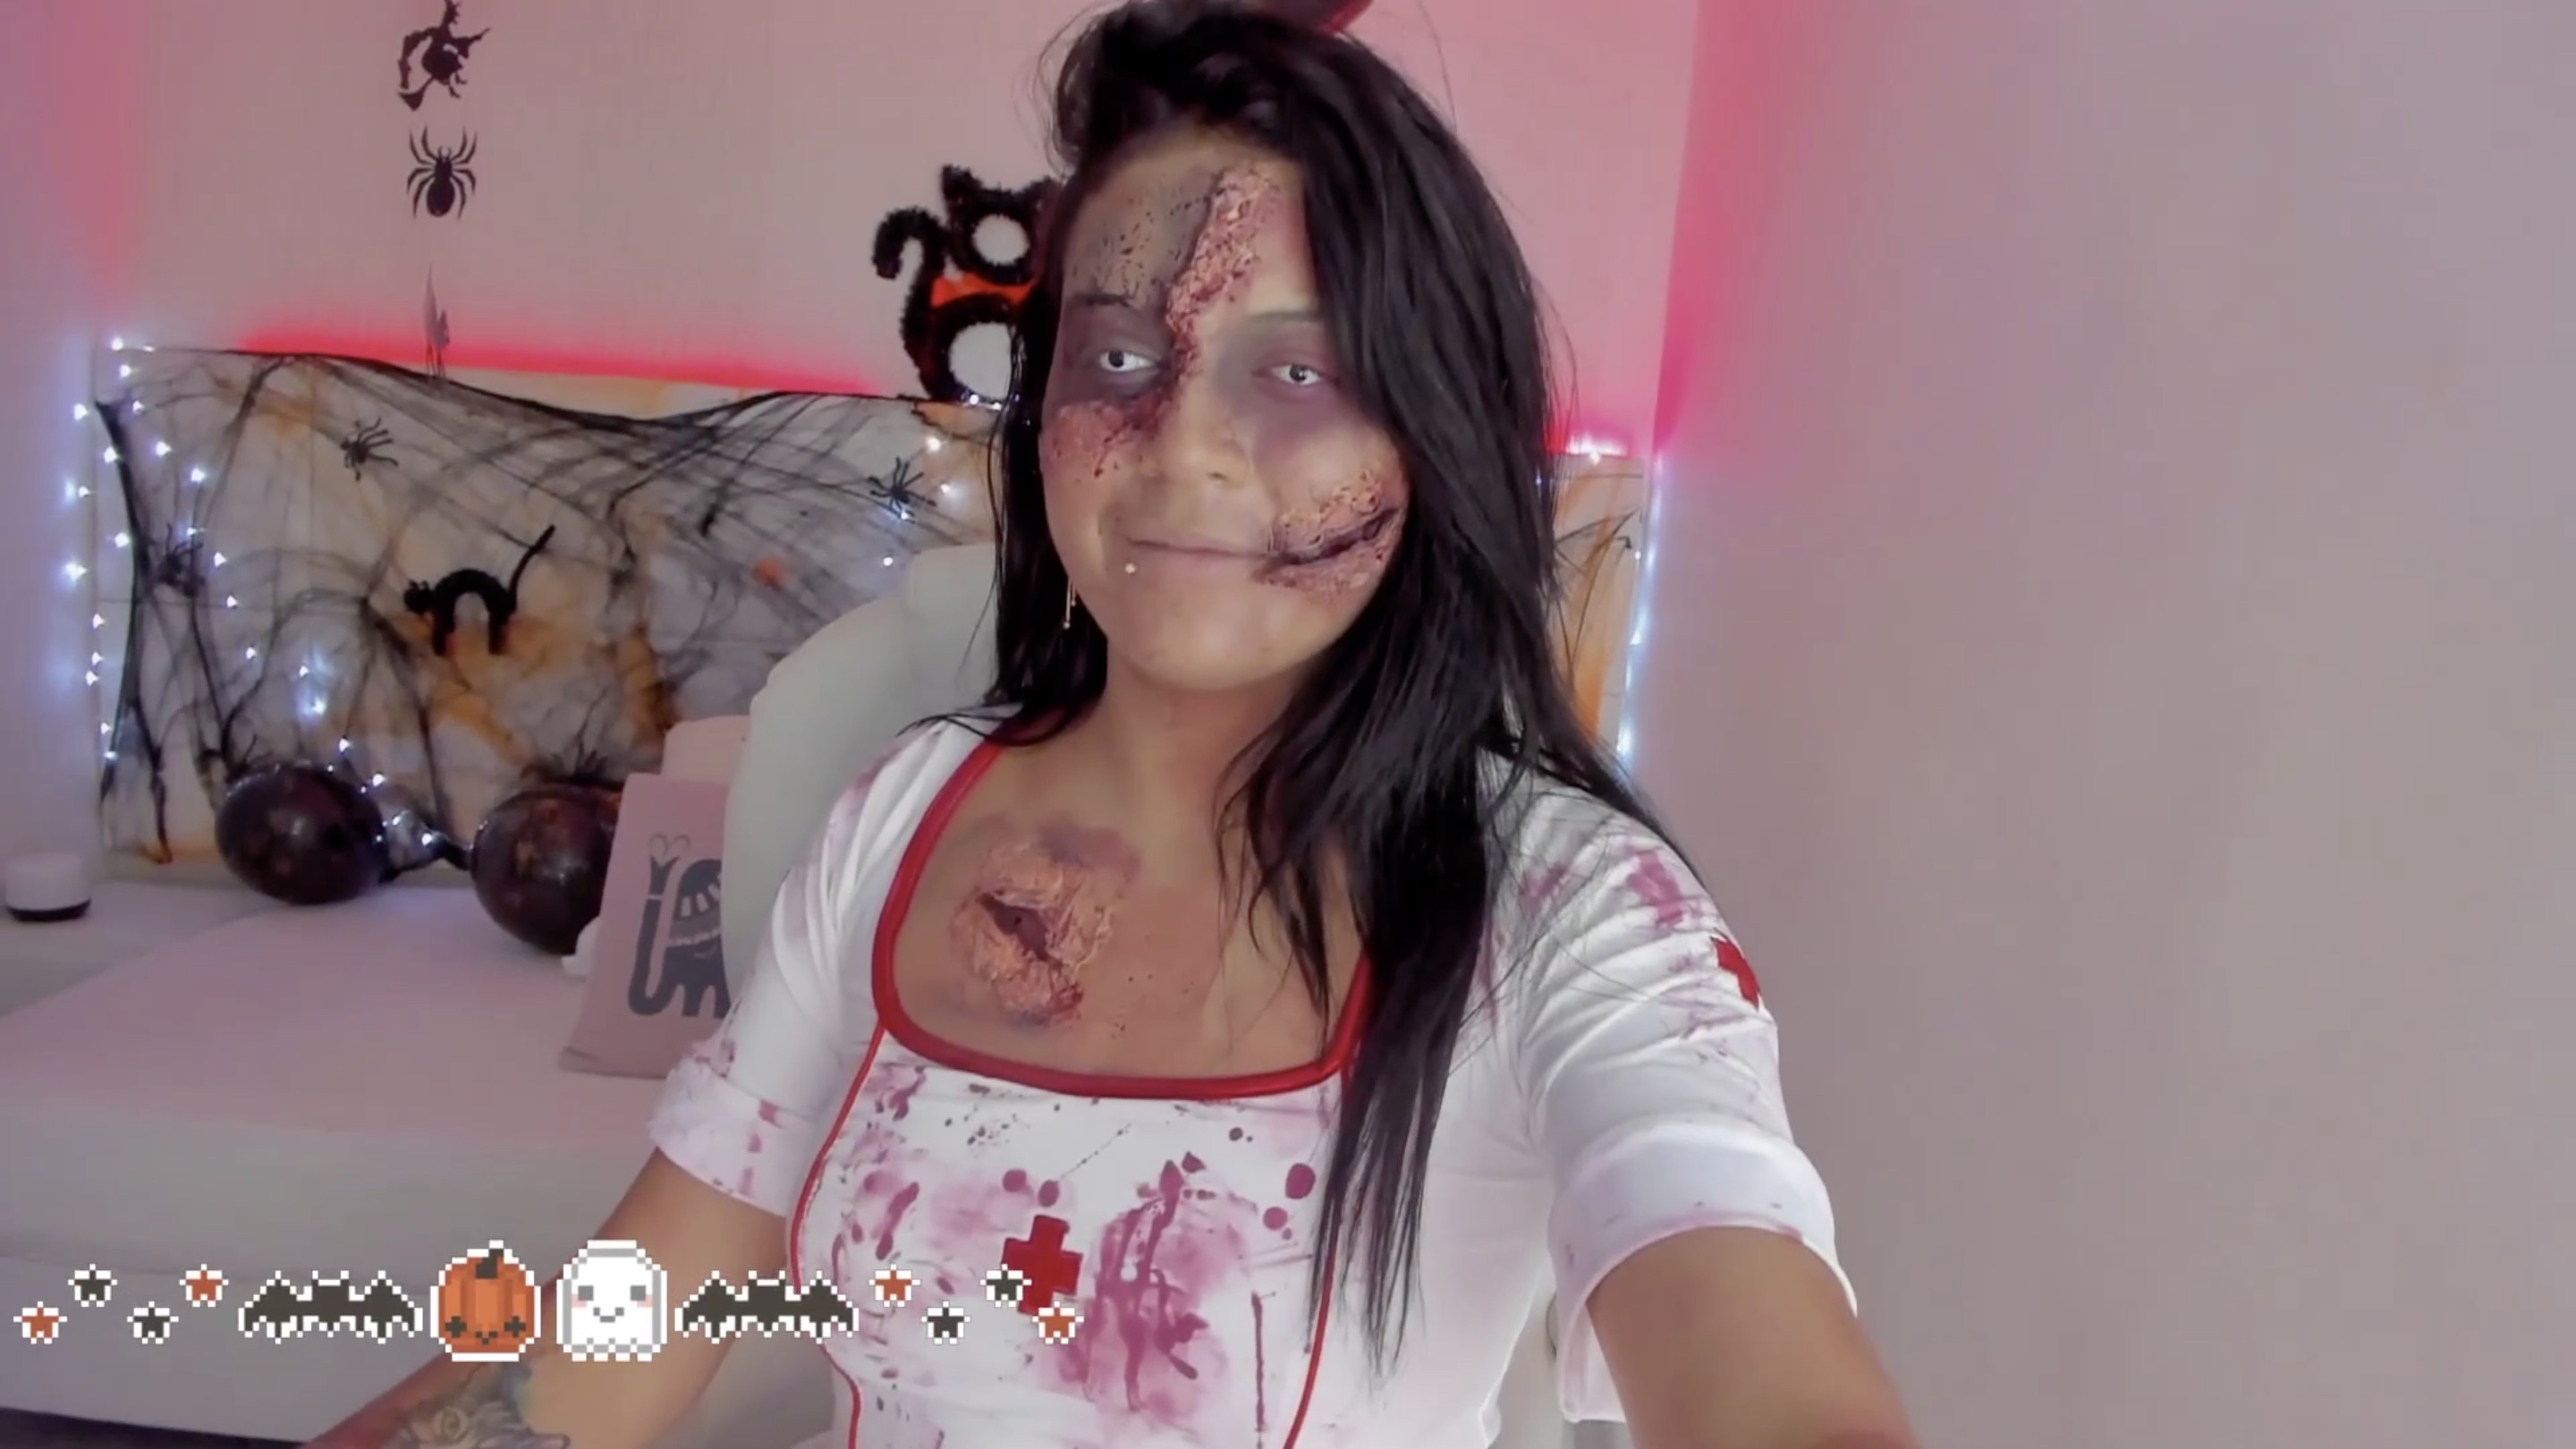 Zombie Nurse ShiirlyAdams Is Looking For Something To Munch On